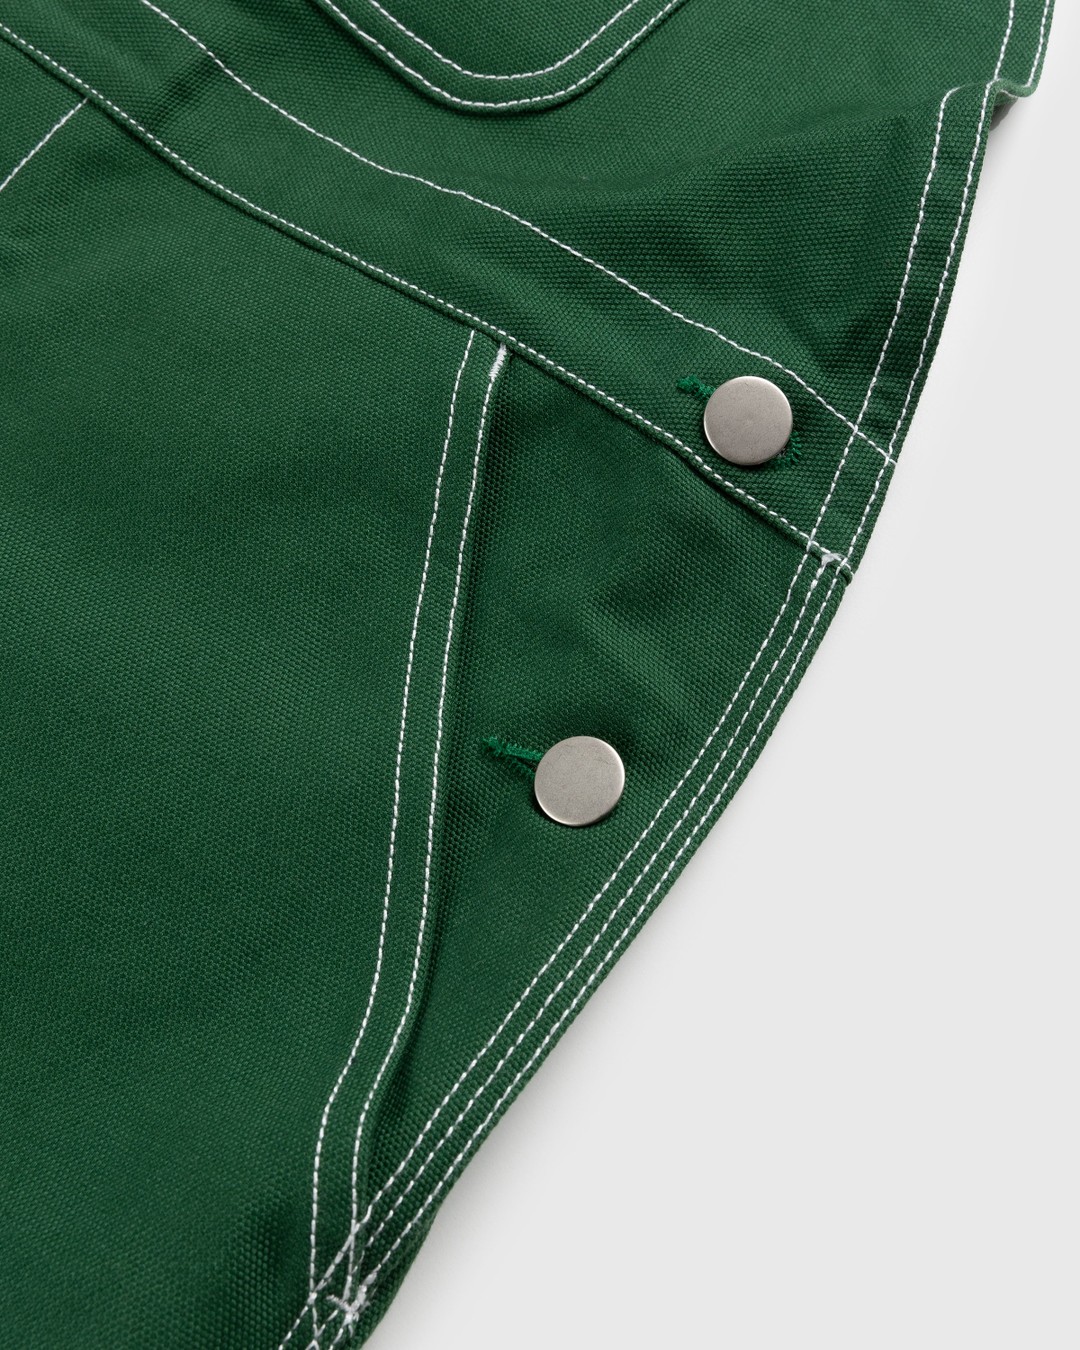 RUF x Highsnobiety – Cotton Overalls Green - Trousers - Green - Image 3